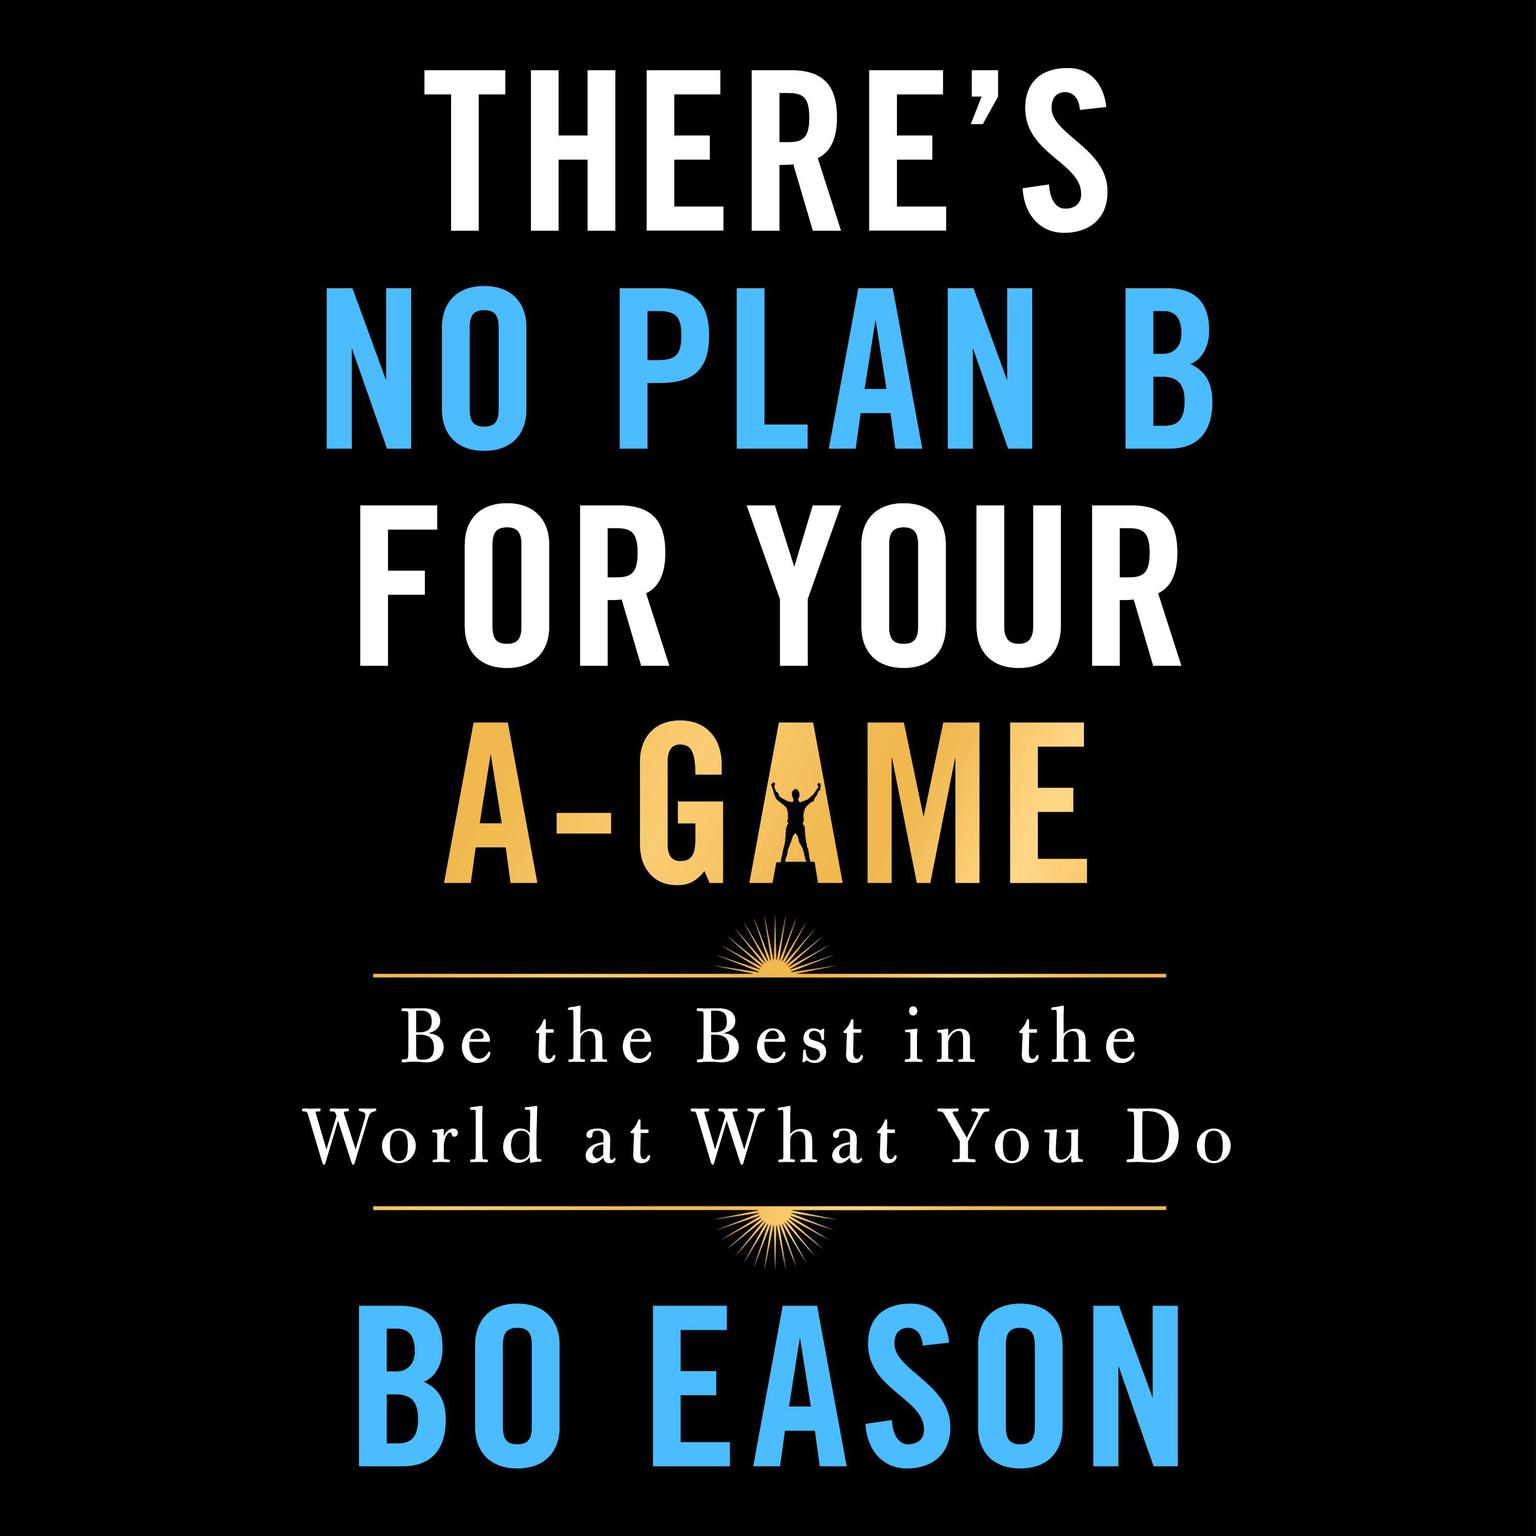 Theres No Plan B for Your A-Game (Abridged): Be the Best in the World at What You Do Audiobook, by Bo Eason